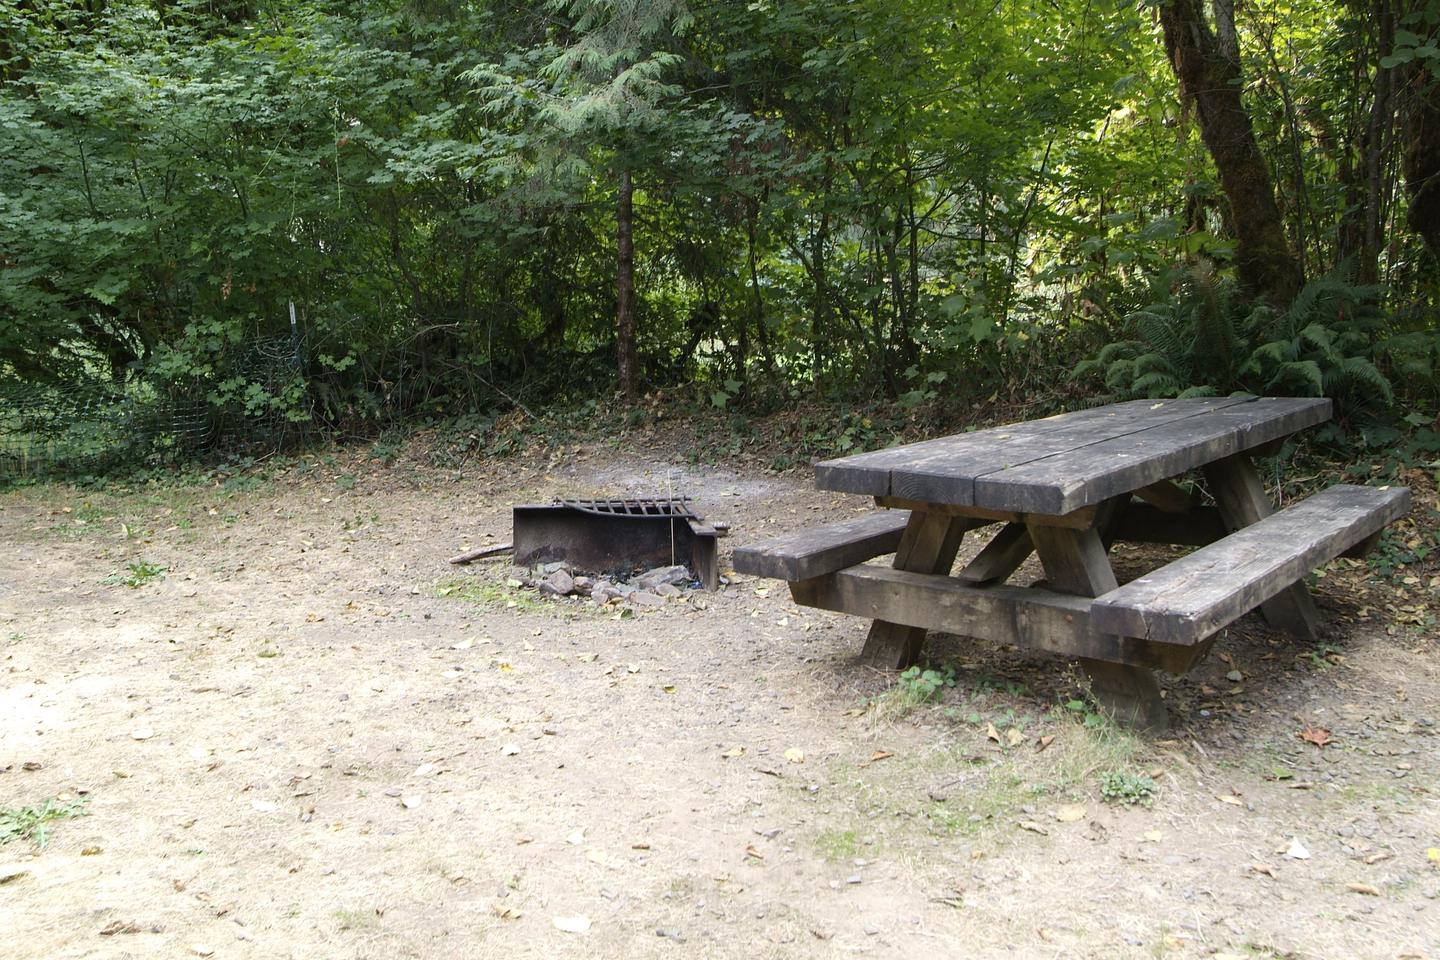 Table and fire ring for camp site 26. Camp site 26 table and fire ring. 